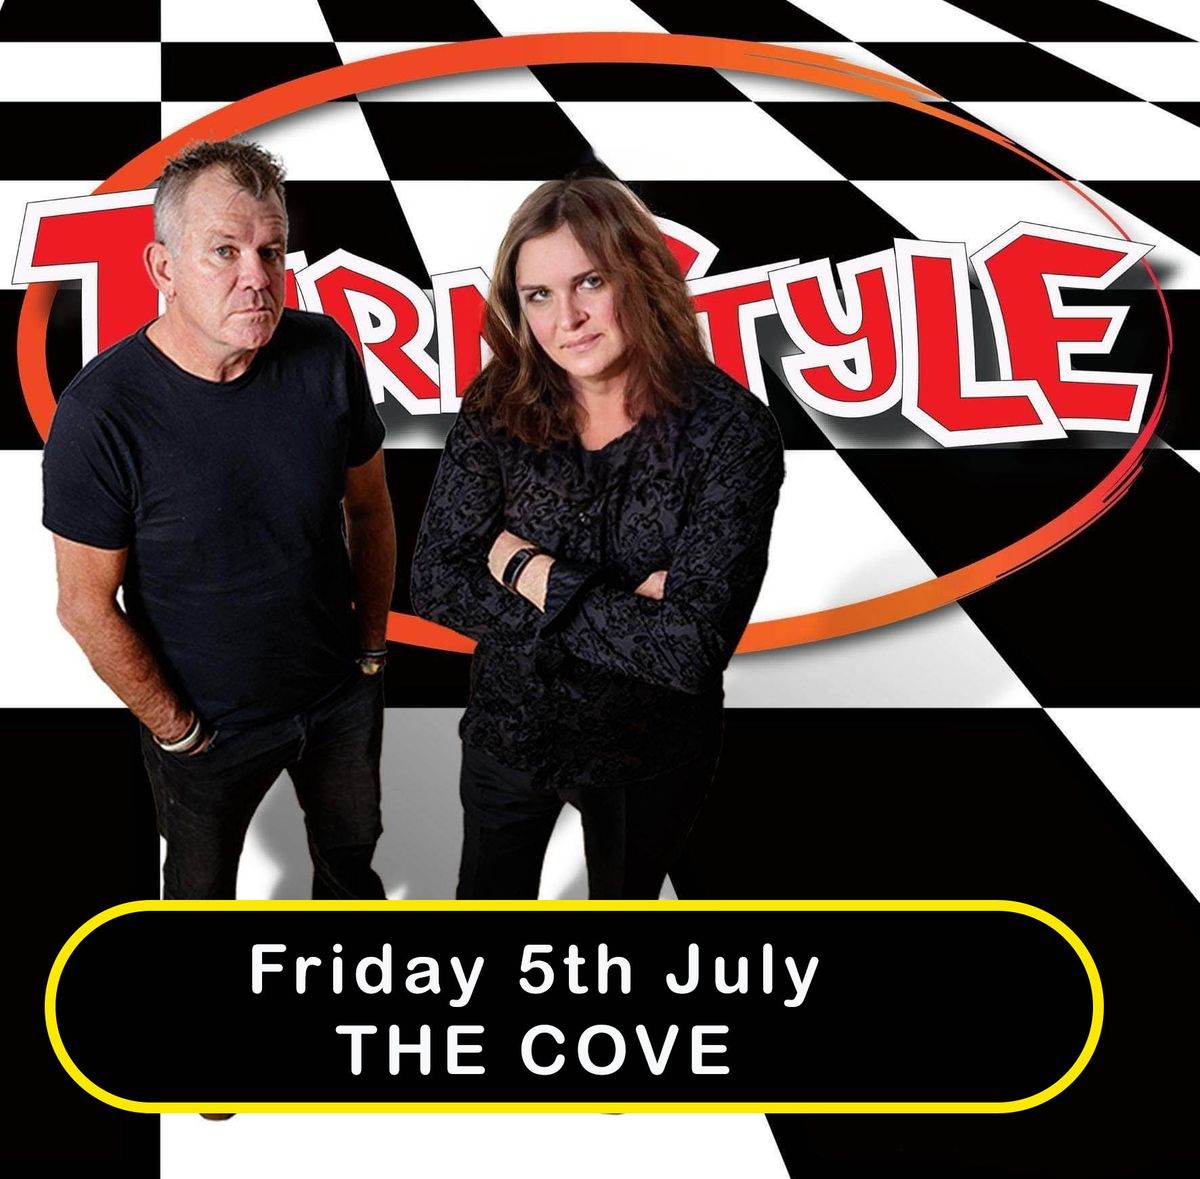 Turnstyle - Great News Back at the Cove